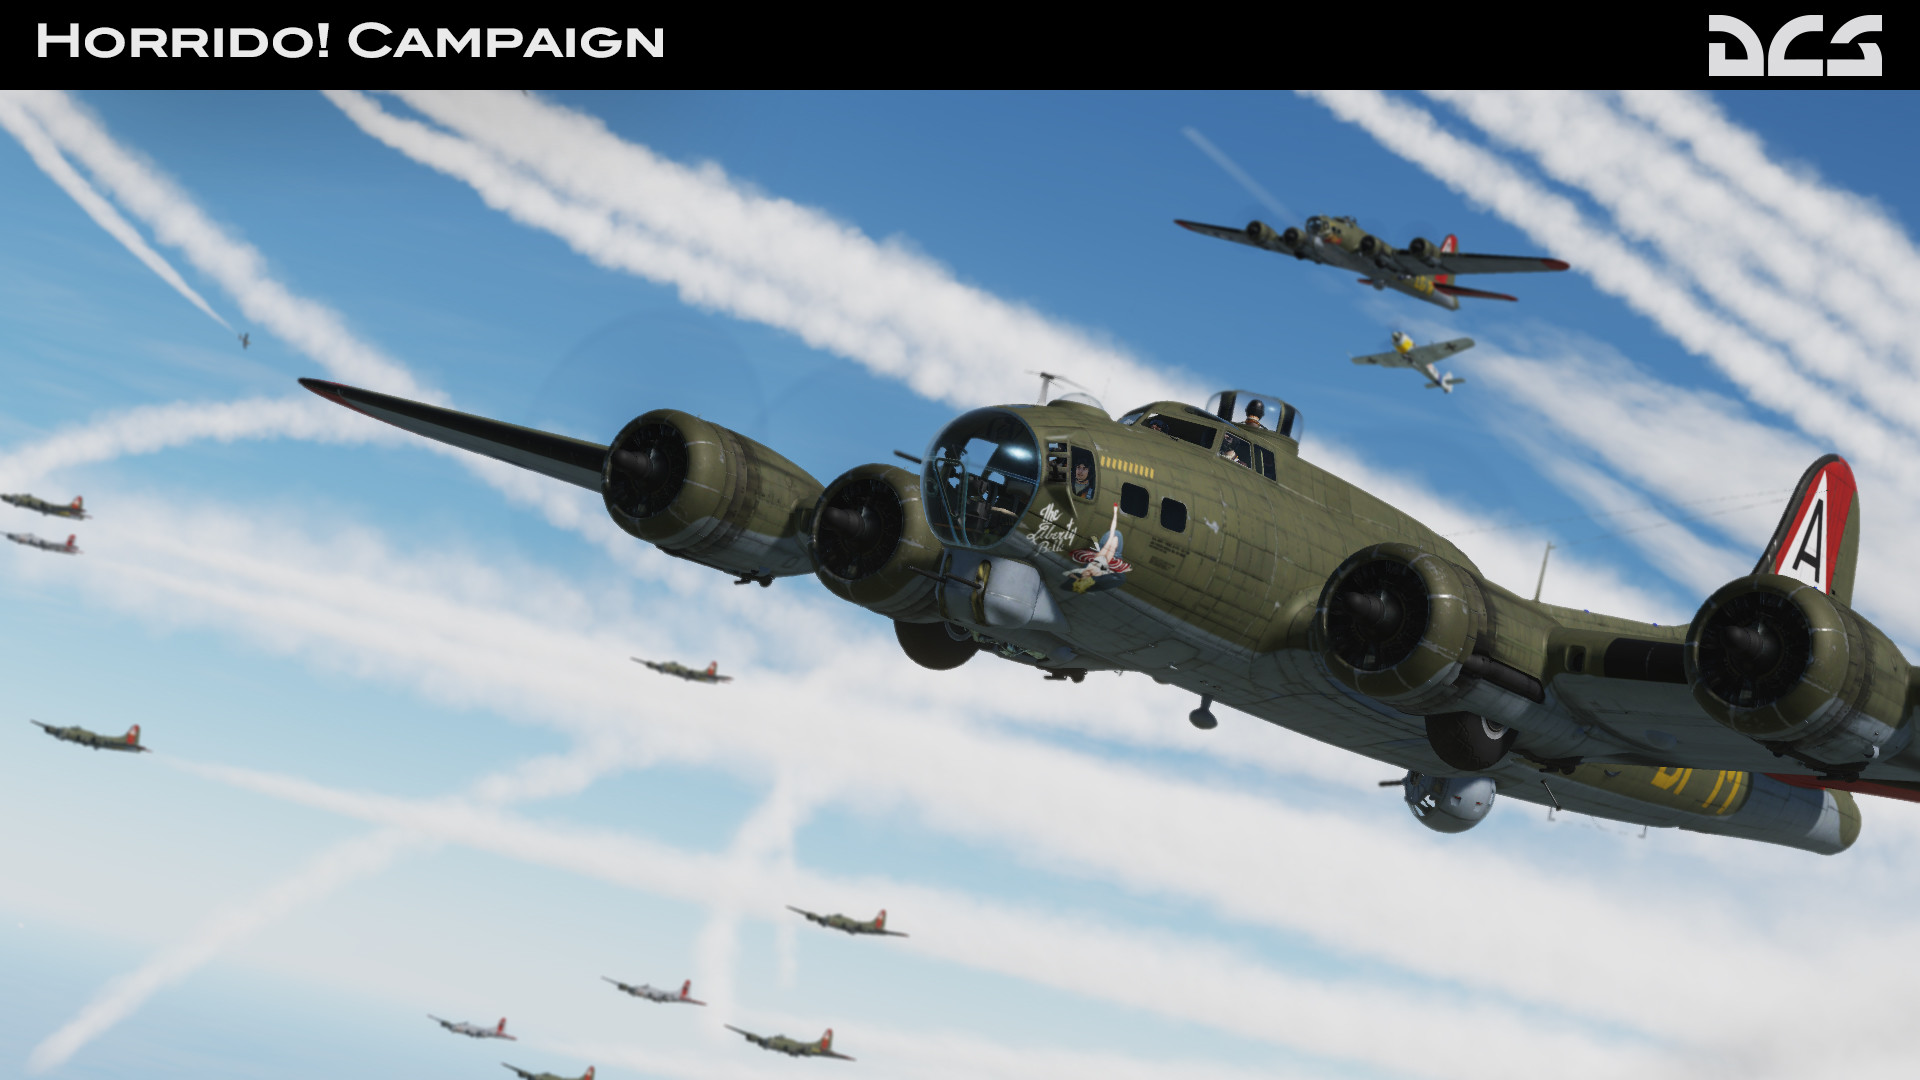 A-8 190 Horrido! DCS: on Campaign Fw Steam